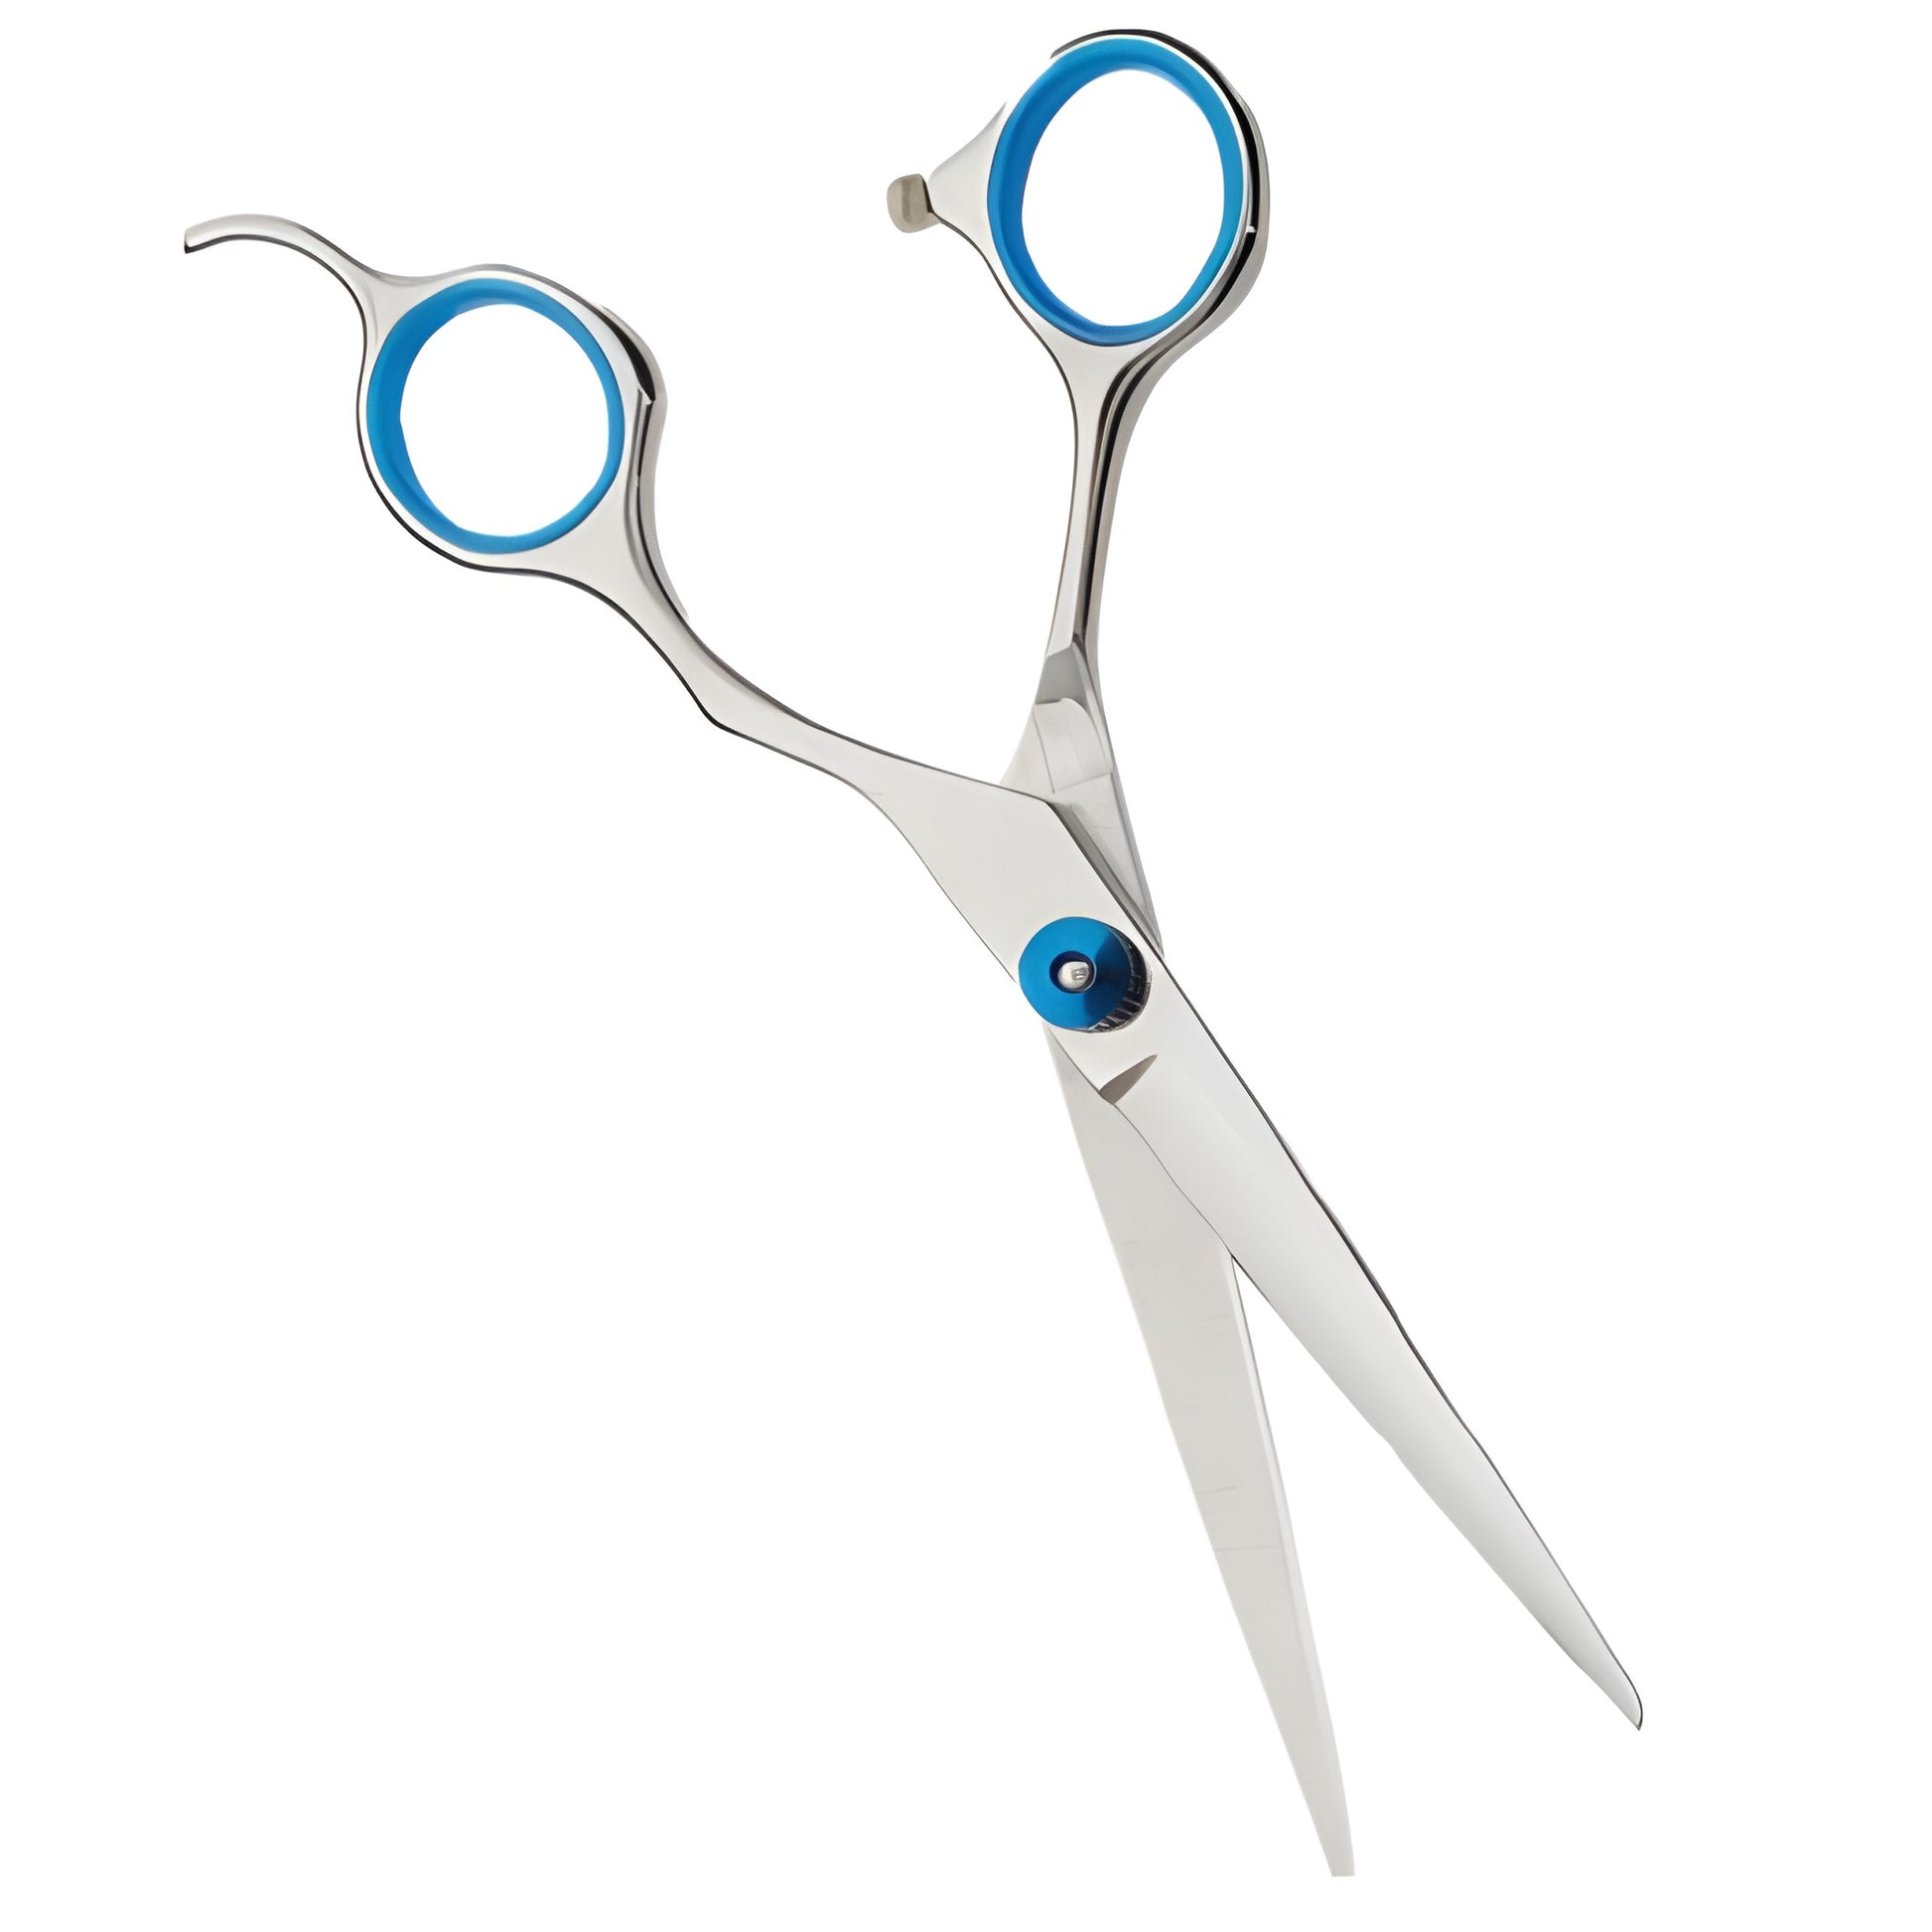 Blue and stainless steel beard trimming scissors